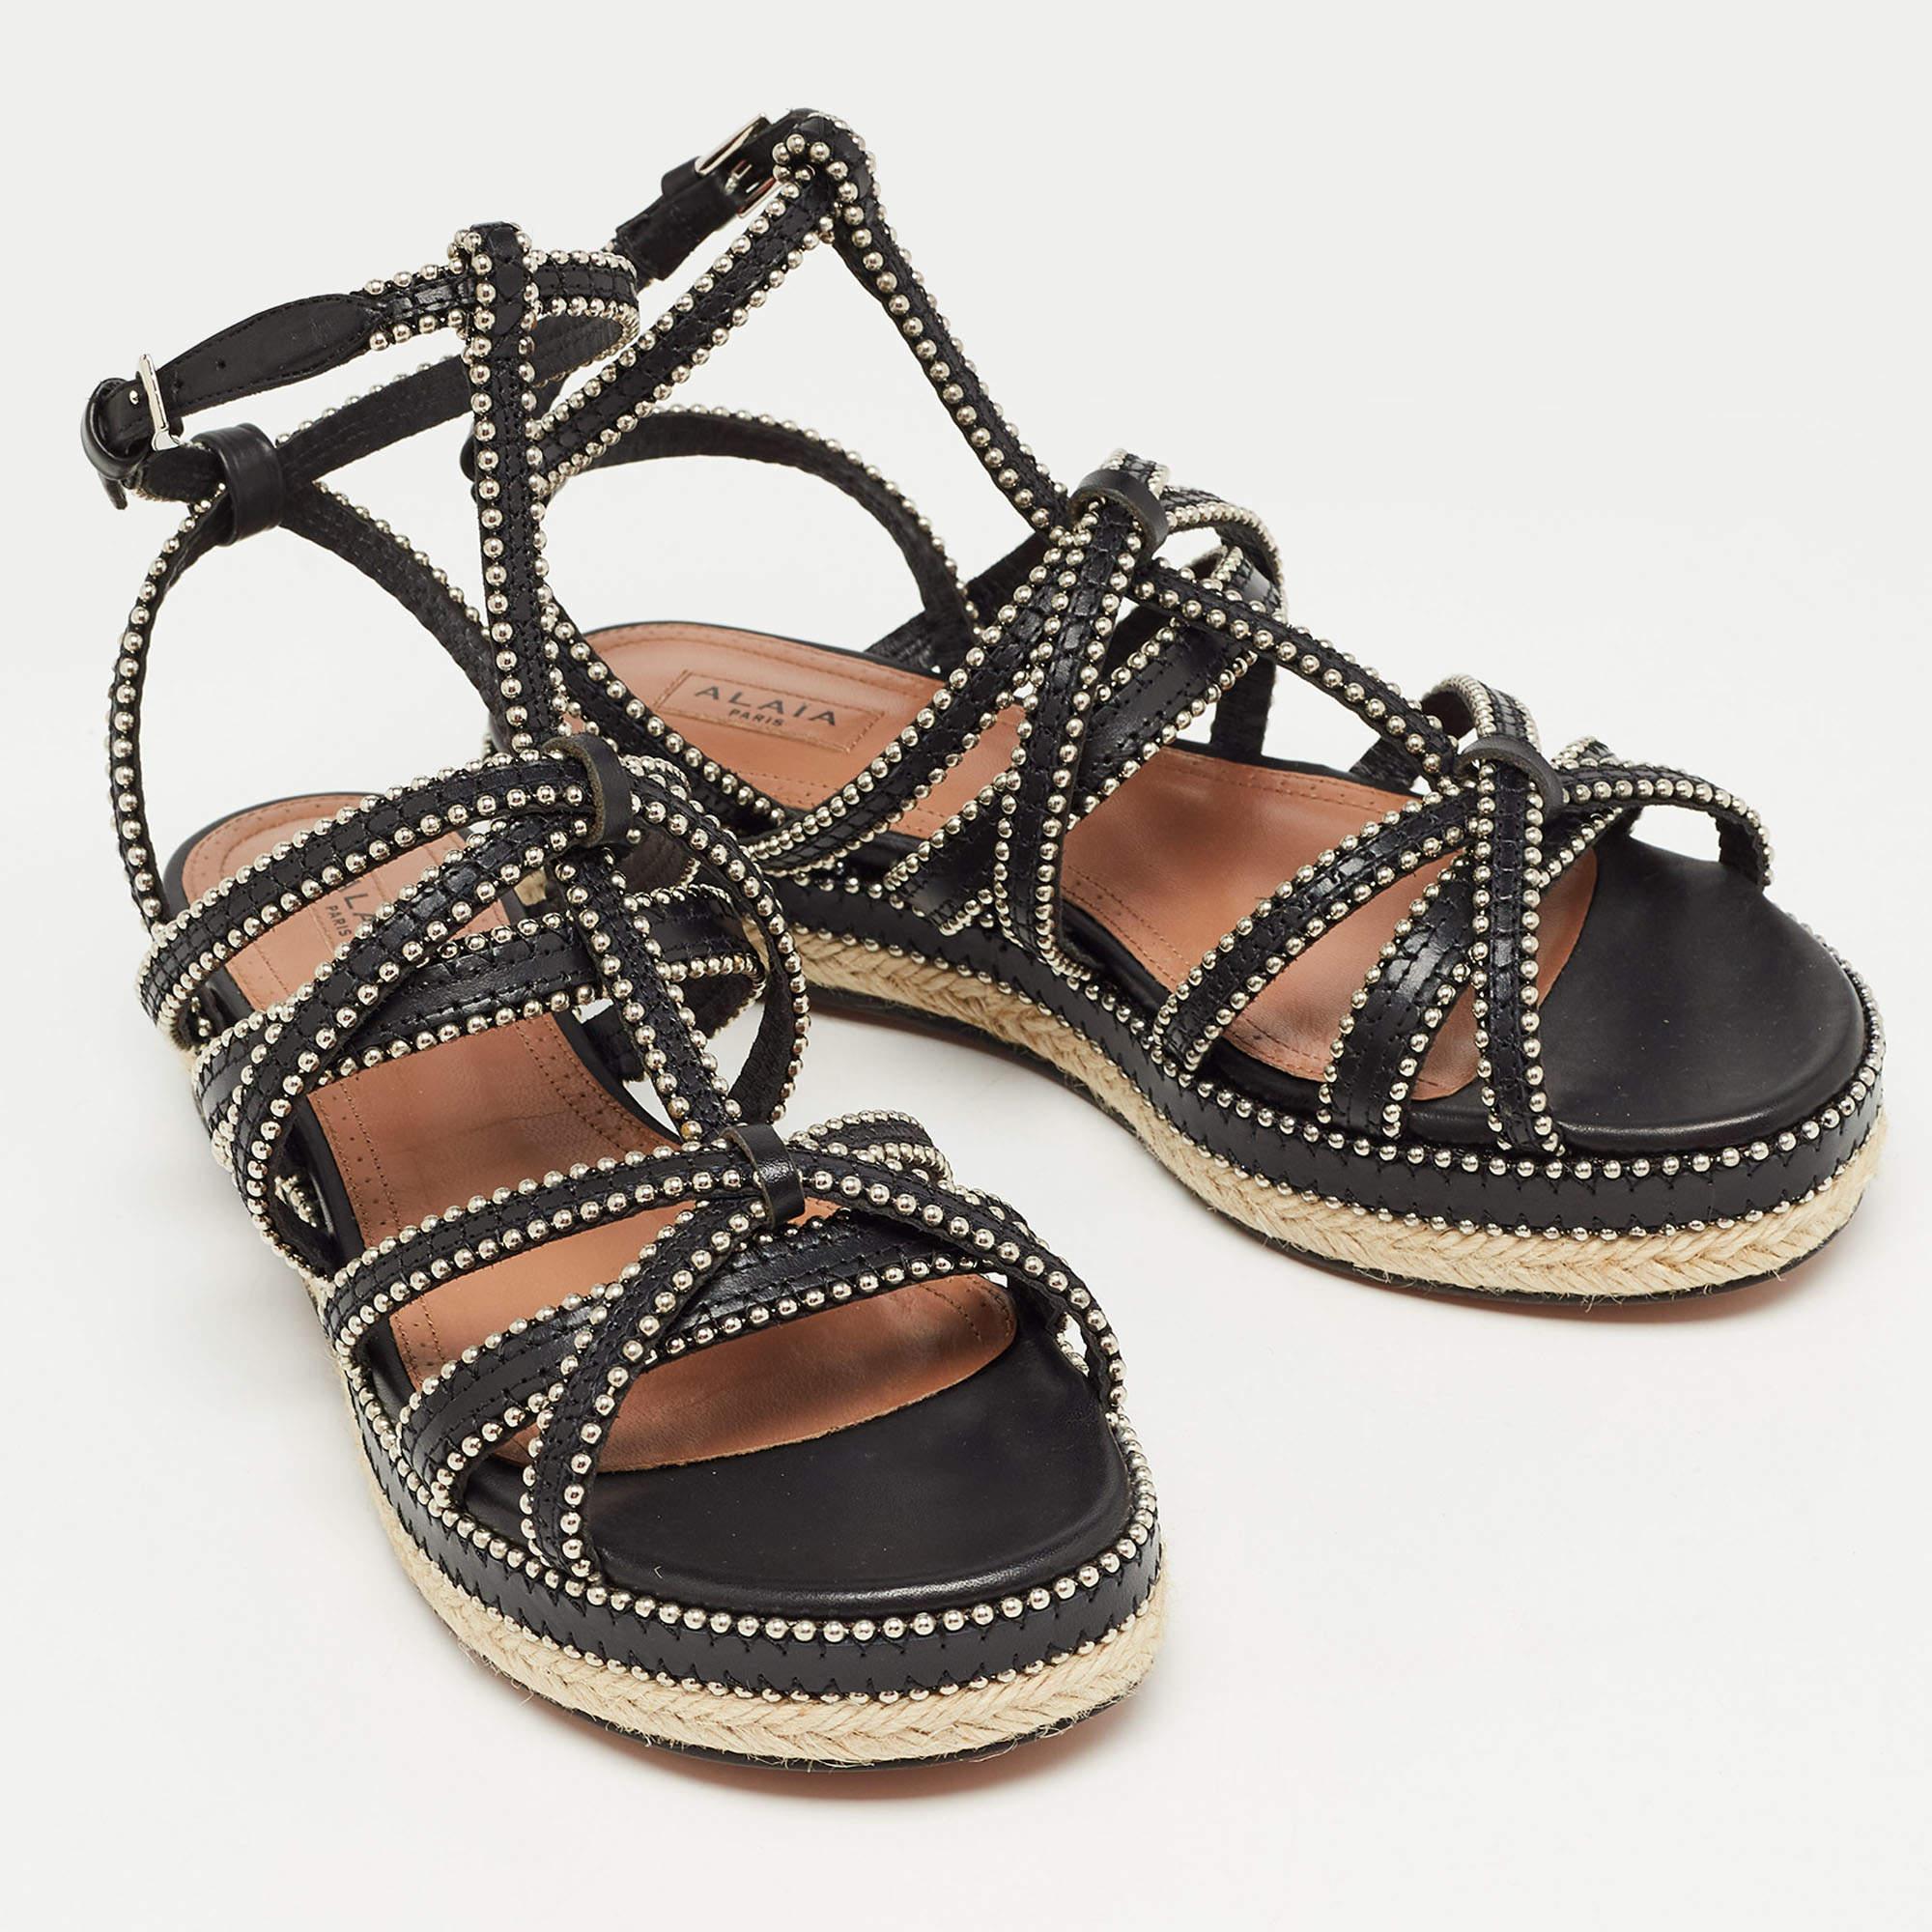 Alaia Black Leather Studded Strappy Espadrille Flat Sandals Size 37 In Excellent Condition For Sale In Dubai, Al Qouz 2